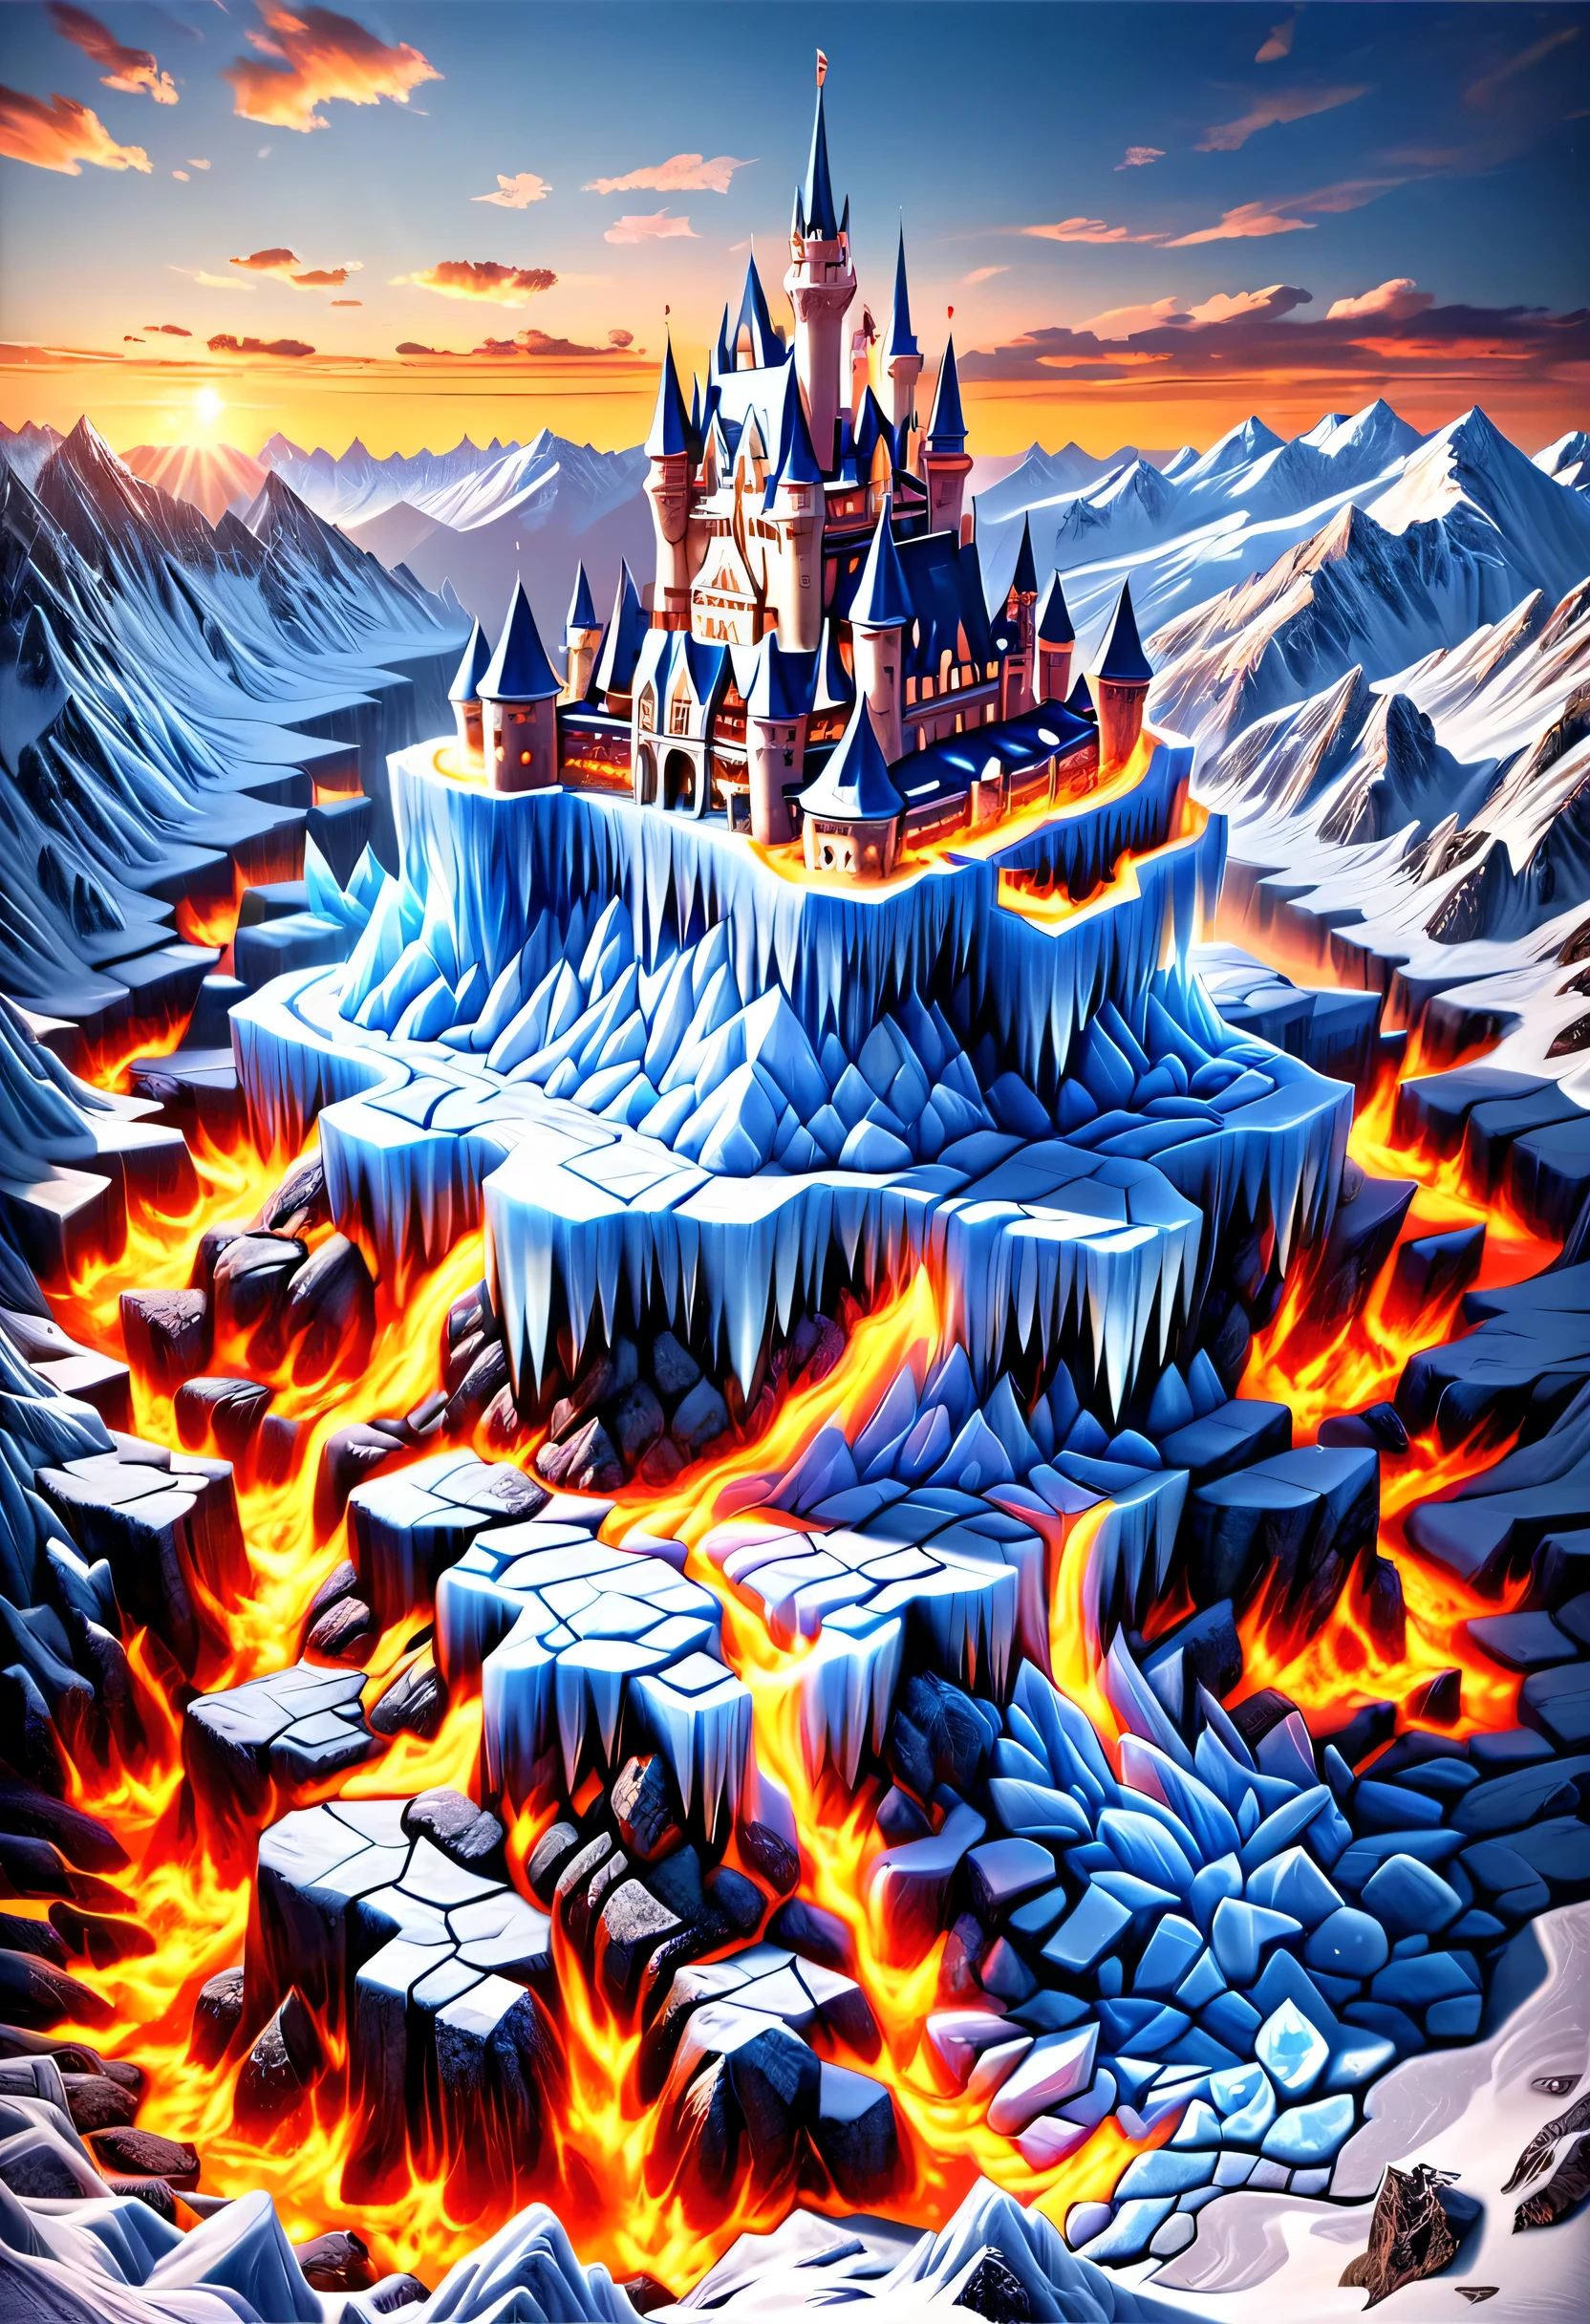 a panoramic award winning photography, Photorealistic, extremely detailed of a castle made from (ice: 1.3) made_of_ice standing on the peak of a snowy mountain, an impressive best detailed castle made from ice (Photorealistic, extremely detailed), with towers, bridges, a moat filled with lava (Photorealistic, extremely detailed),  standing on top of a snowy mountain (masterpiece, extremely detailed, best quality), with pine trees, sunset light, some clouds in the air,  alpine mountain range background, best realistic, best details, best quality, 16k, [ultra detailed], masterpiece, best quality, (extremely detailed), ultra wide shot, photorealism, depth of field, faize